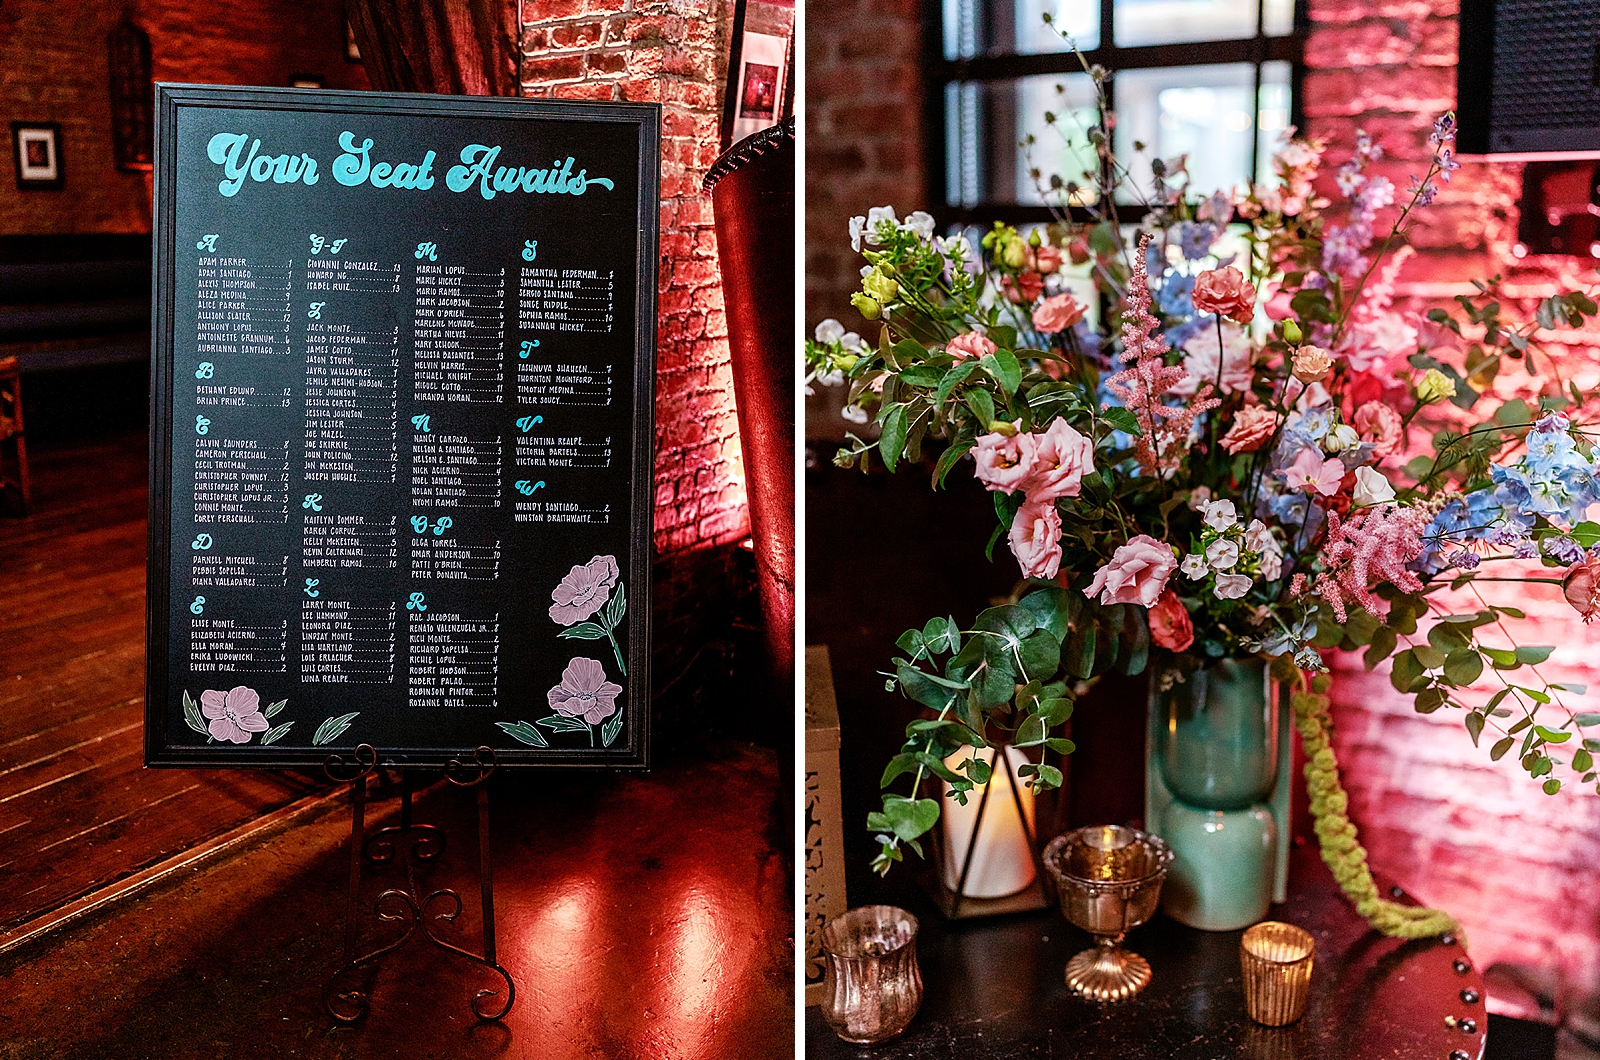 Left photo: Shot of the seating chart. 
Right photo: Up close shot of a floral arrangement. 